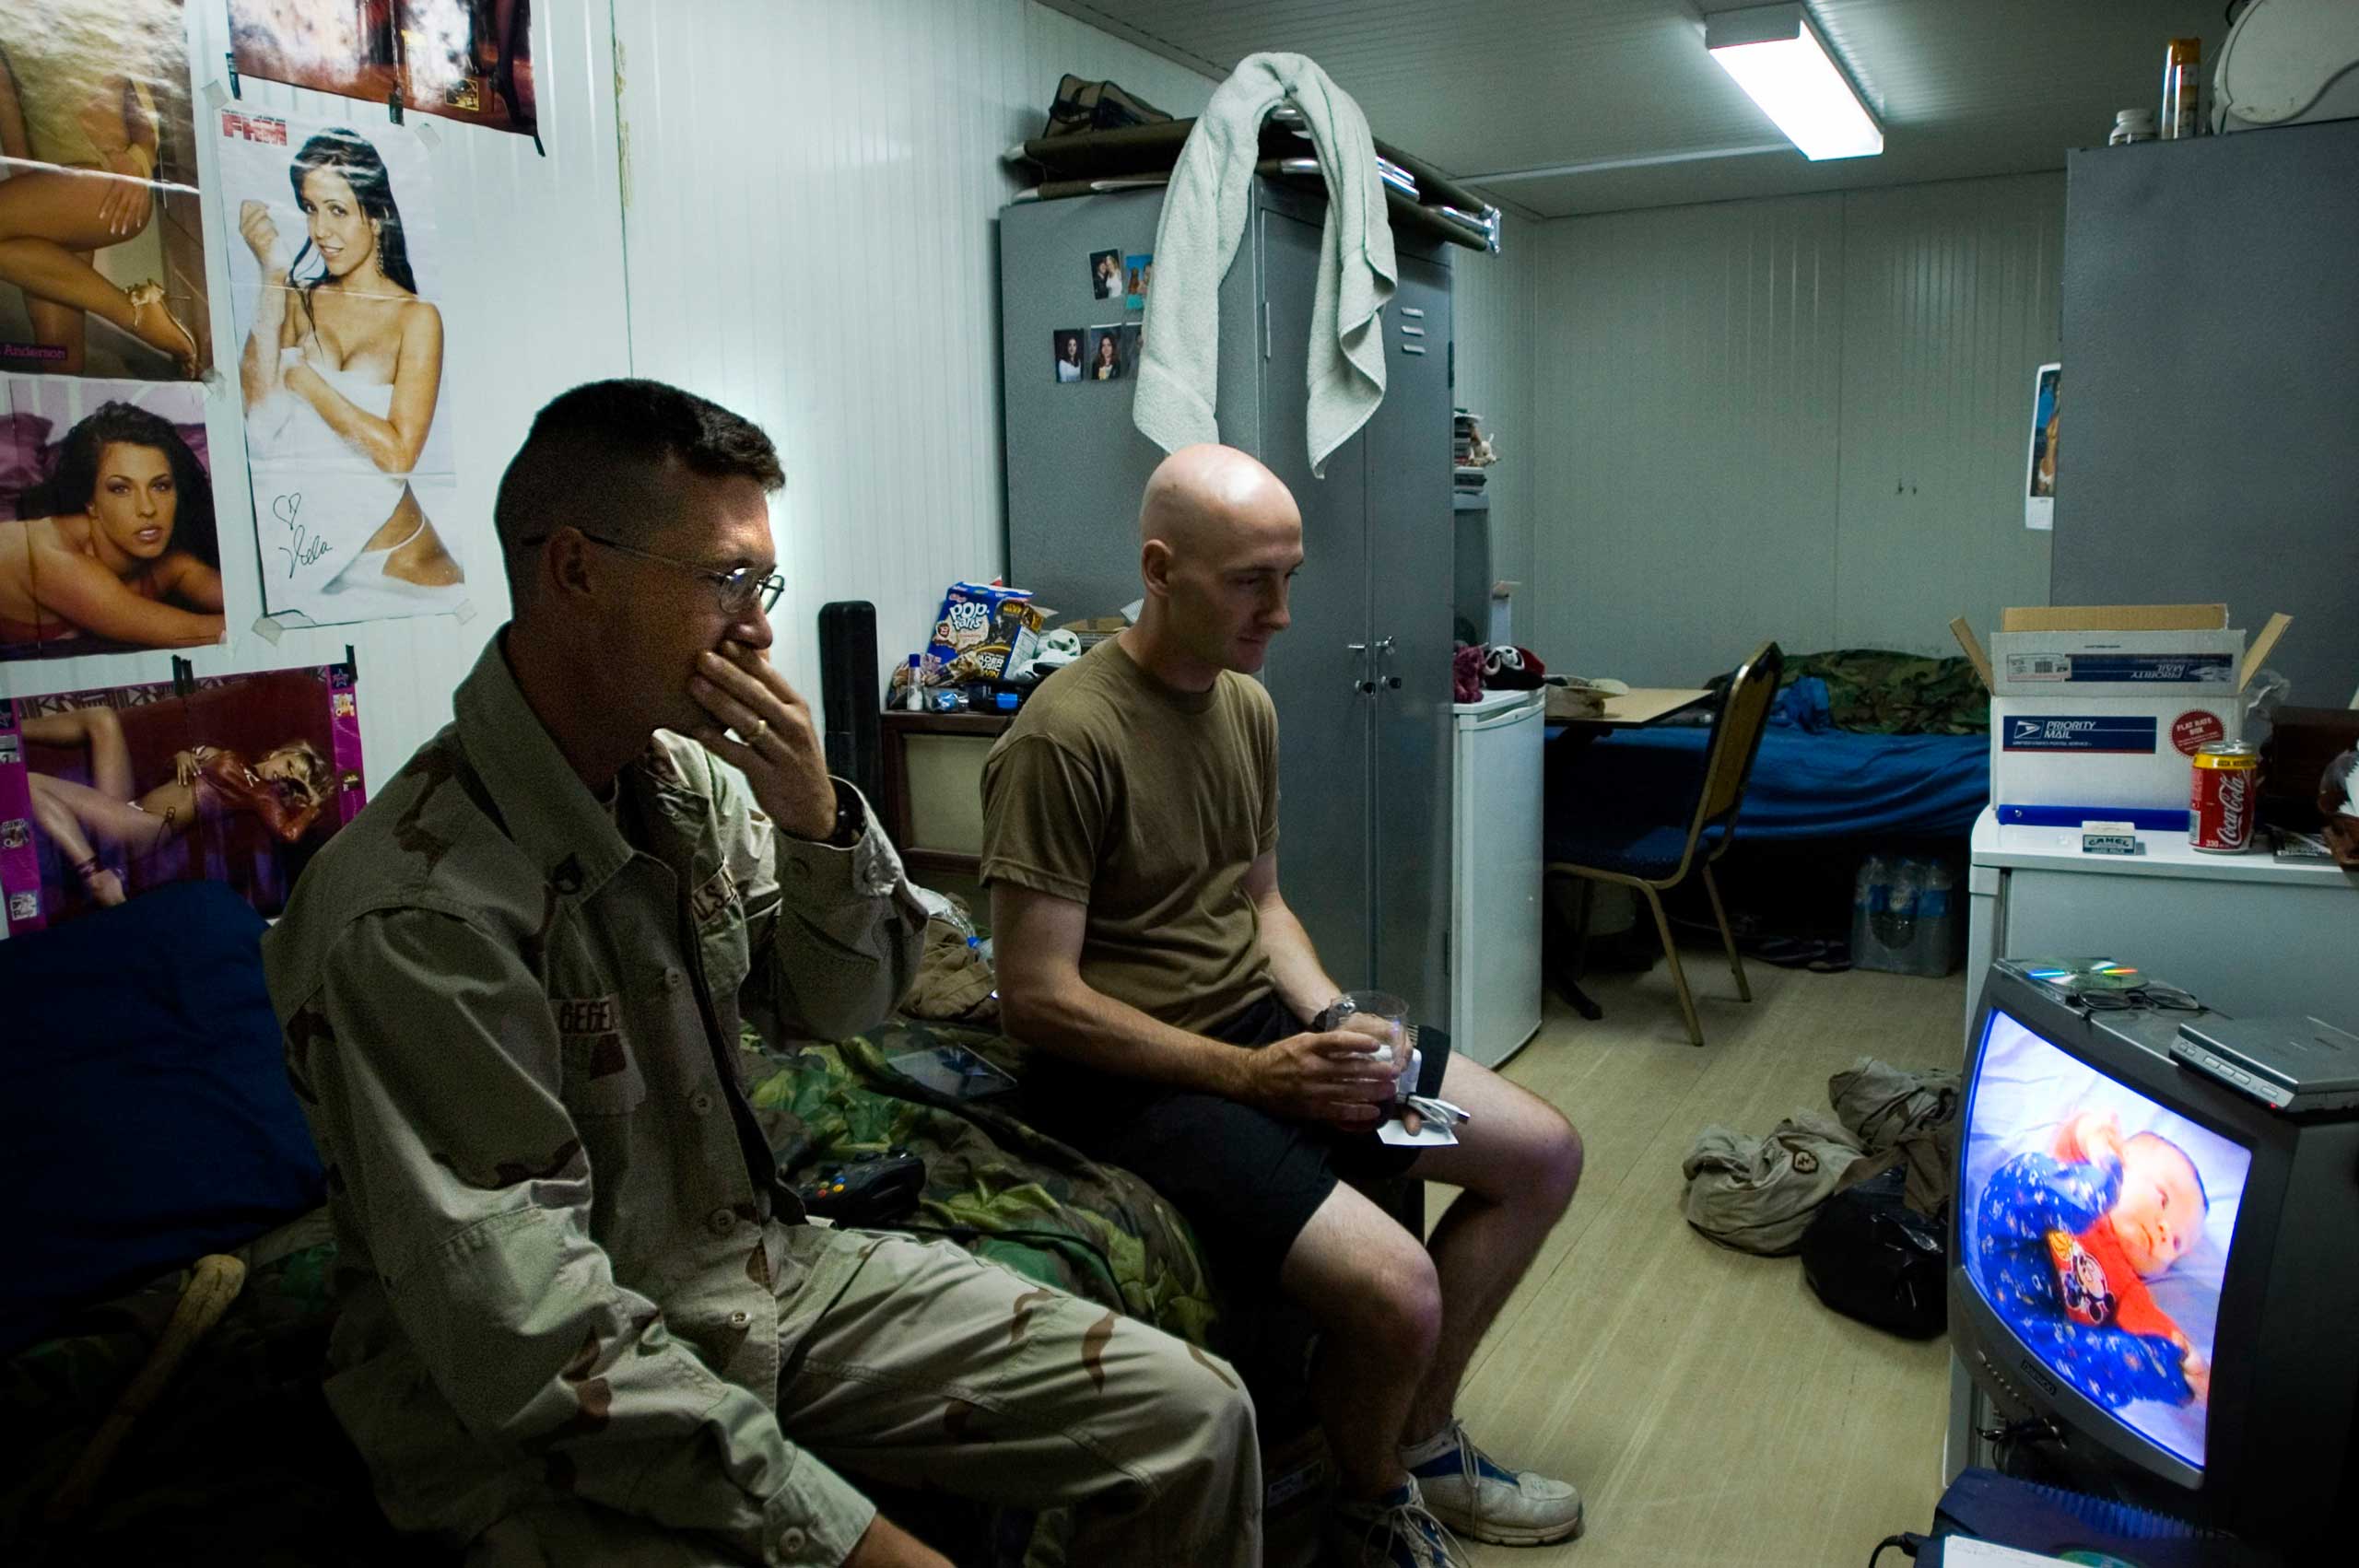 Squad Leader Michael Gegenheimer.
                              Benjamin Lowy, Aug. 19, 2005. Mosul, Iraq.
                              
                               Following the shooting death of a platoon mate during a routine patrol, Squad Leader SSG Michael Gegenheimer, left, of the Alpha Company 3-21 Stryker Battalion watches a video of his newborn child in the small trailer that has been his home for a year in Foward Operating Base Courage in Mosul, Iraq.
                              
                              I stayed with this particular unit for months documenting their lives, their routines, their fears, and their courage. Back in 2005 when I made this image, I myself was not yet a father, but I remember being tremendously touched by the Sergeant’s emotional display. Many of the soldiers in the unit choose to process their teammate’s death in different ways. Some were angry, some watched violent movies, others comedies. But looking at his newborn child was more of a reminder for Gegenheimer of what was waiting for him at home when he finally survived and left Iraq.